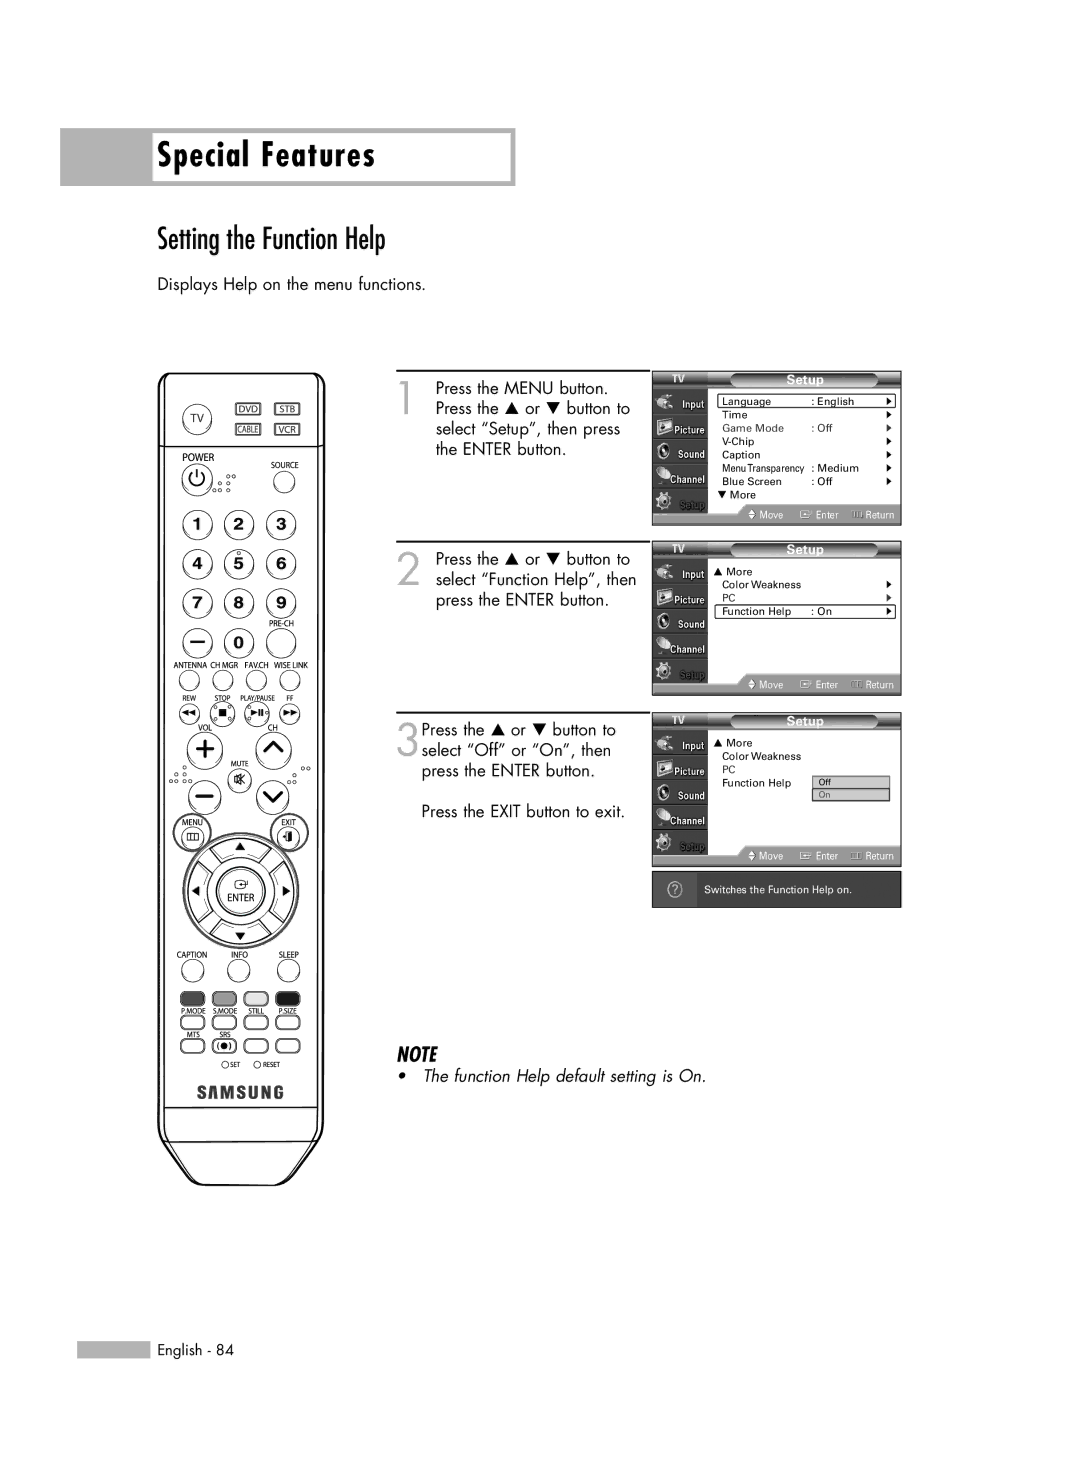 Samsung HL-S6166W, HL-S5066W, HL-S4666W, HL-S5666W manual Special Features, Setting the Function Help 